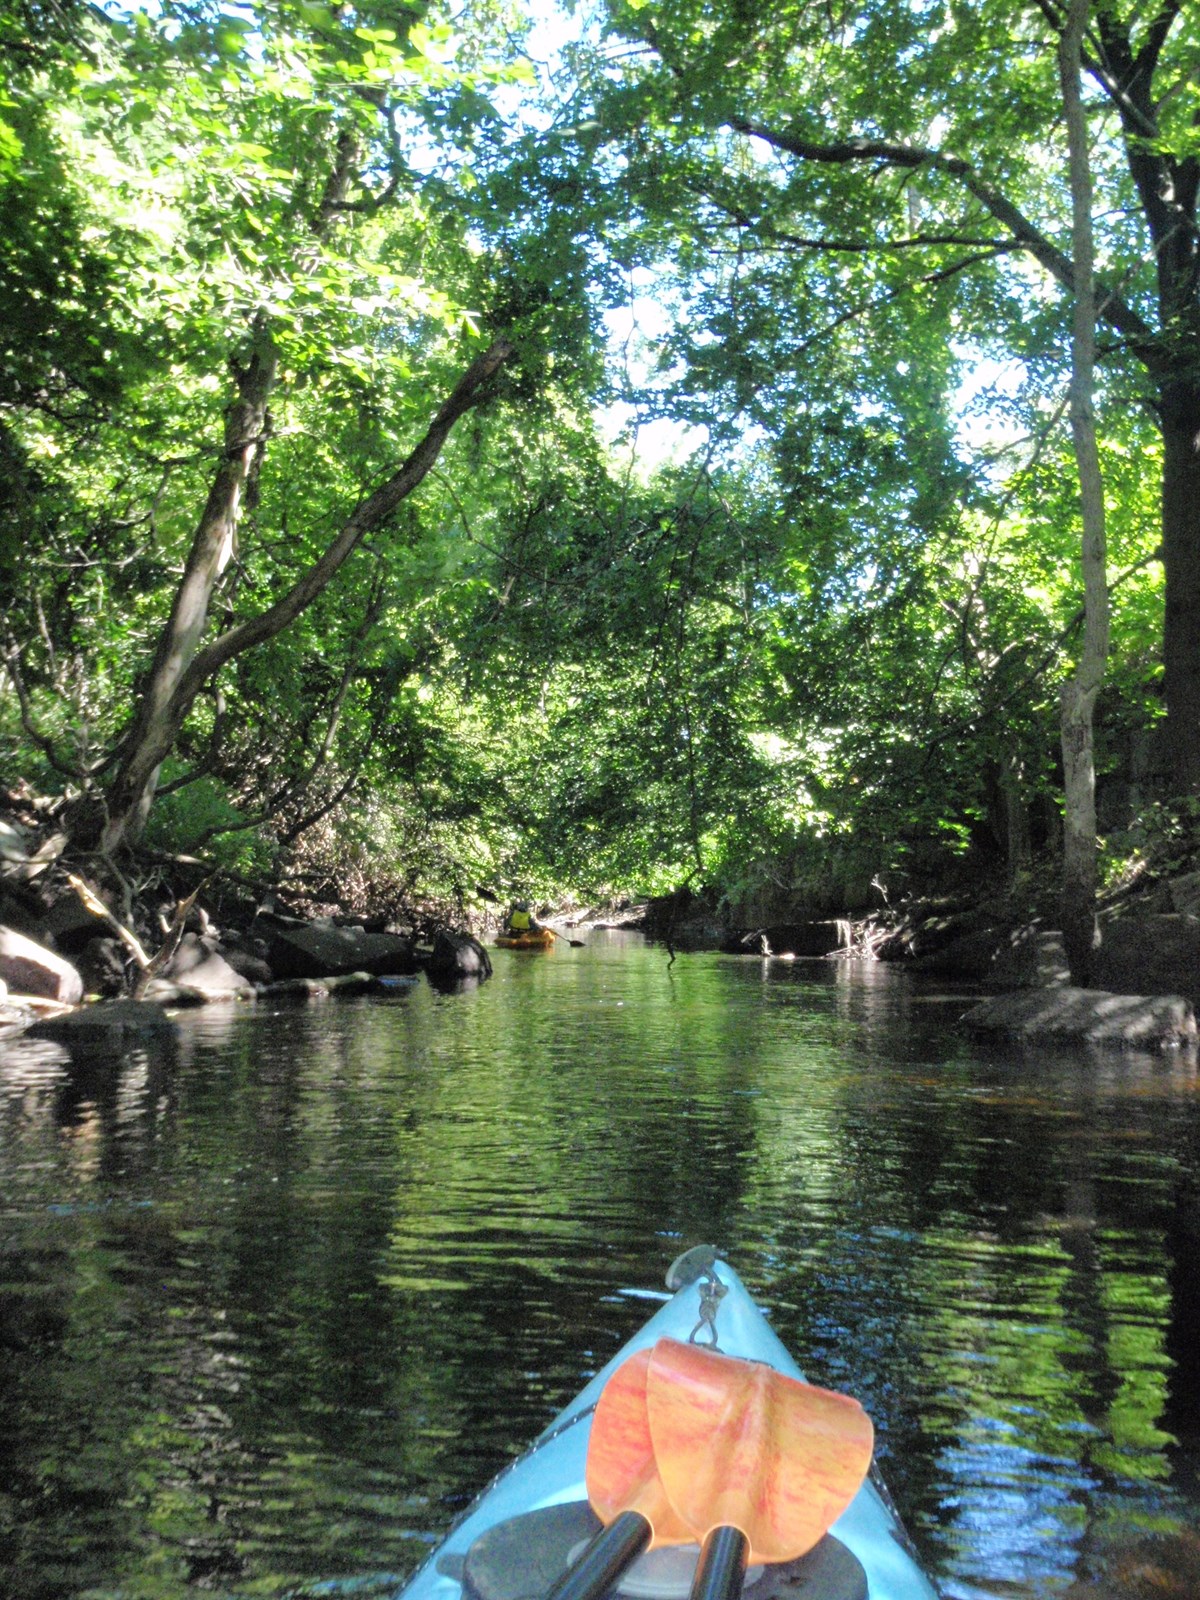 The front of kayak as it drufts down a creek with trees surrounding both sides.